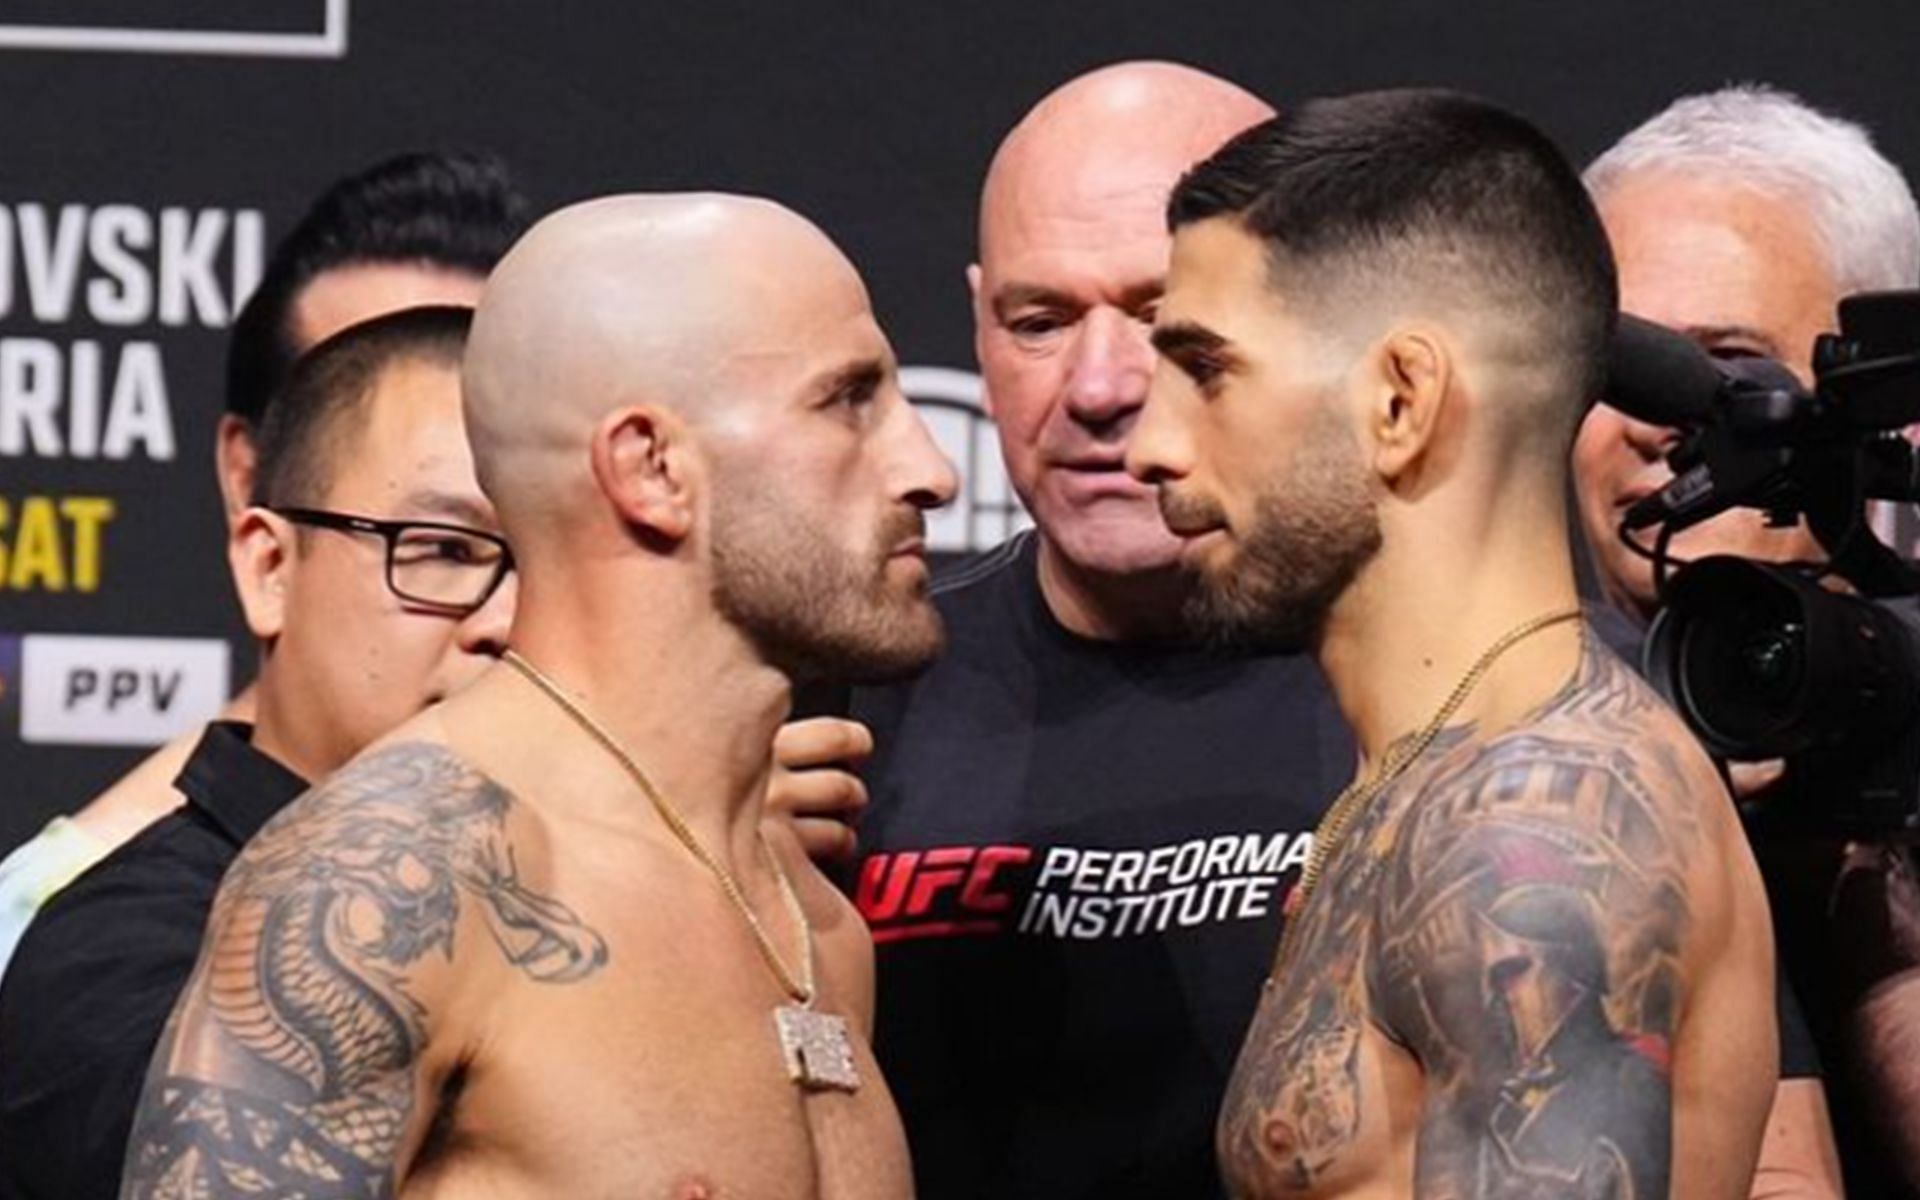 Alexander Volkanovski (left) attempts the sixth defense of his 145-pound title against Ilia Topuria tonight (right) [Image Courtesy: @ufc Instagram]